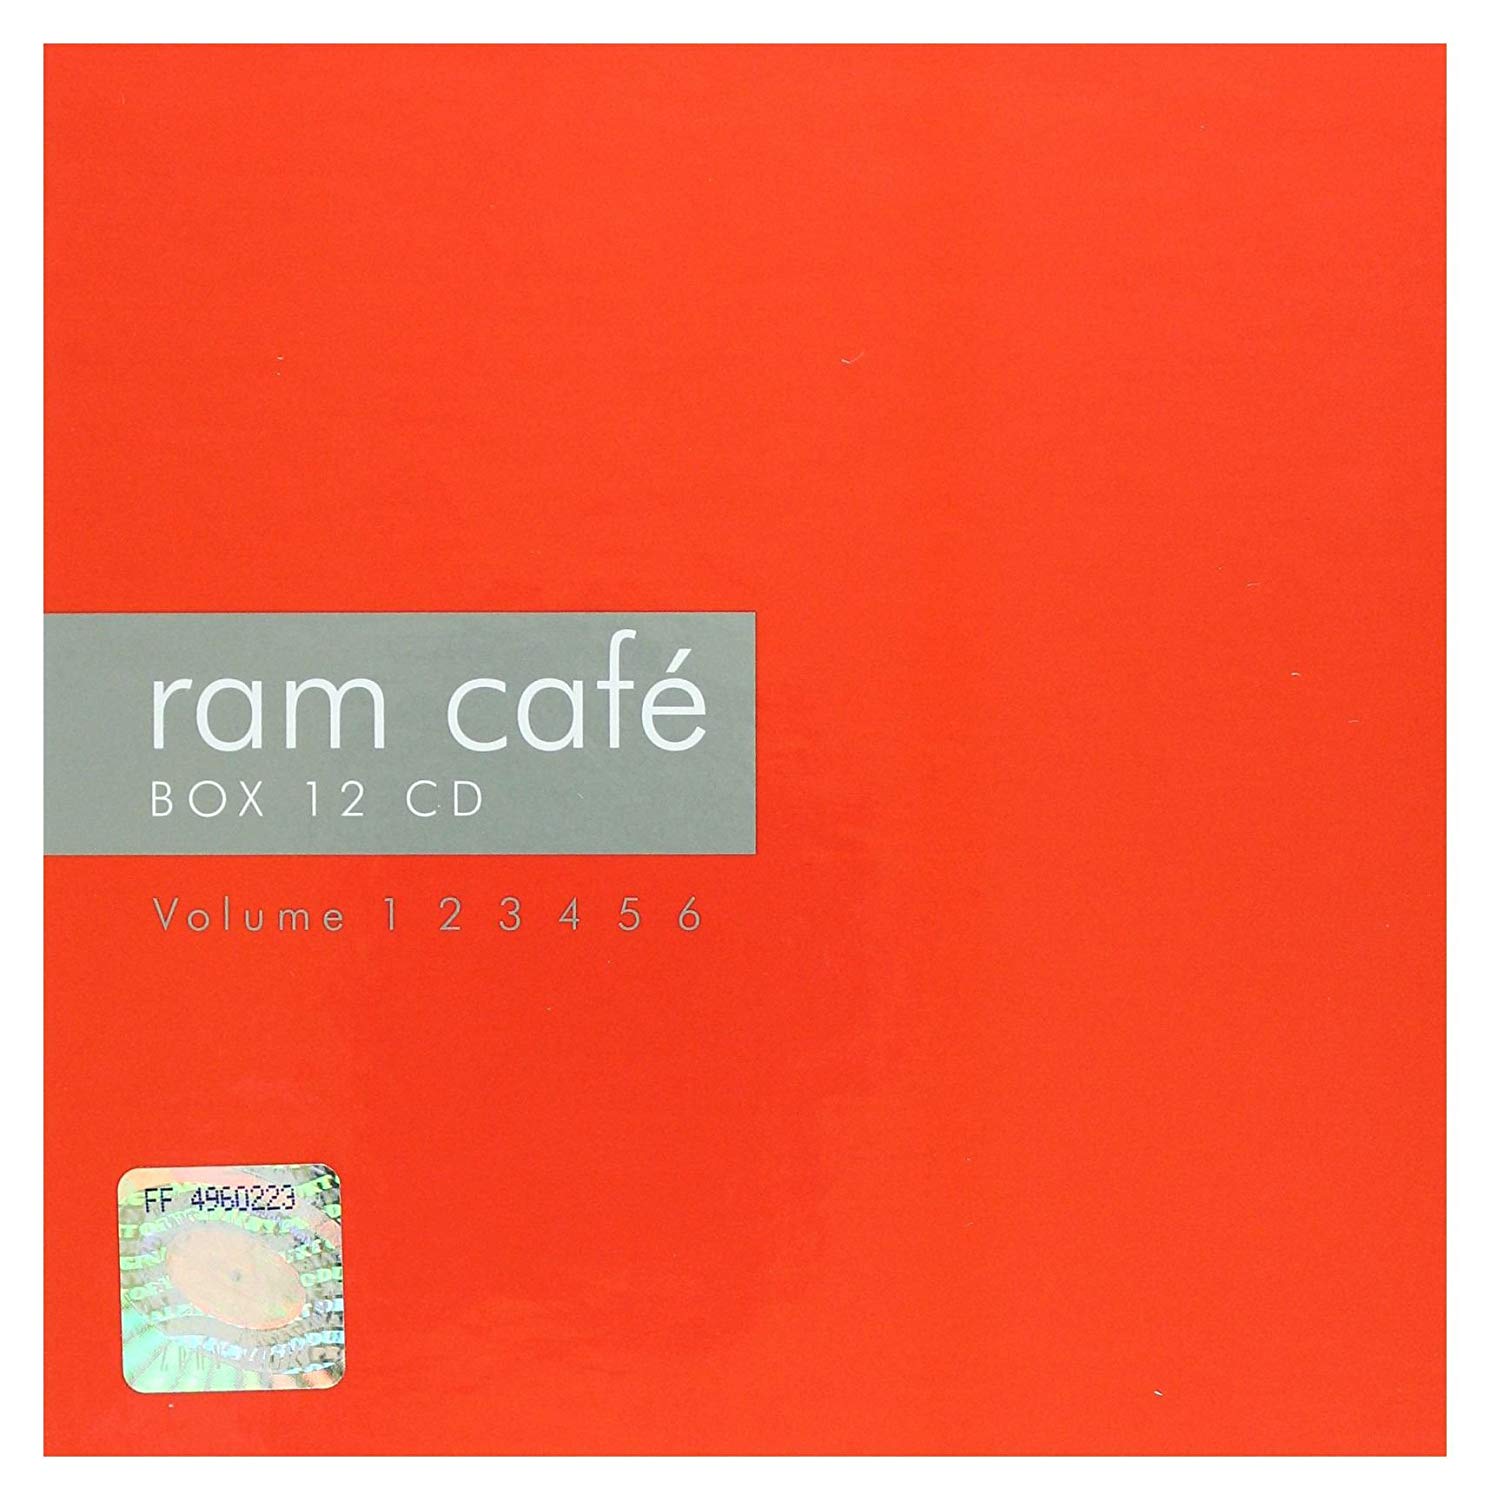 Ram Cafe. Hooverphonic 2005 - no more Sweet Music. Hooverphonic no more Sweet Music. Va Ram Cafe 8. Flac 2011